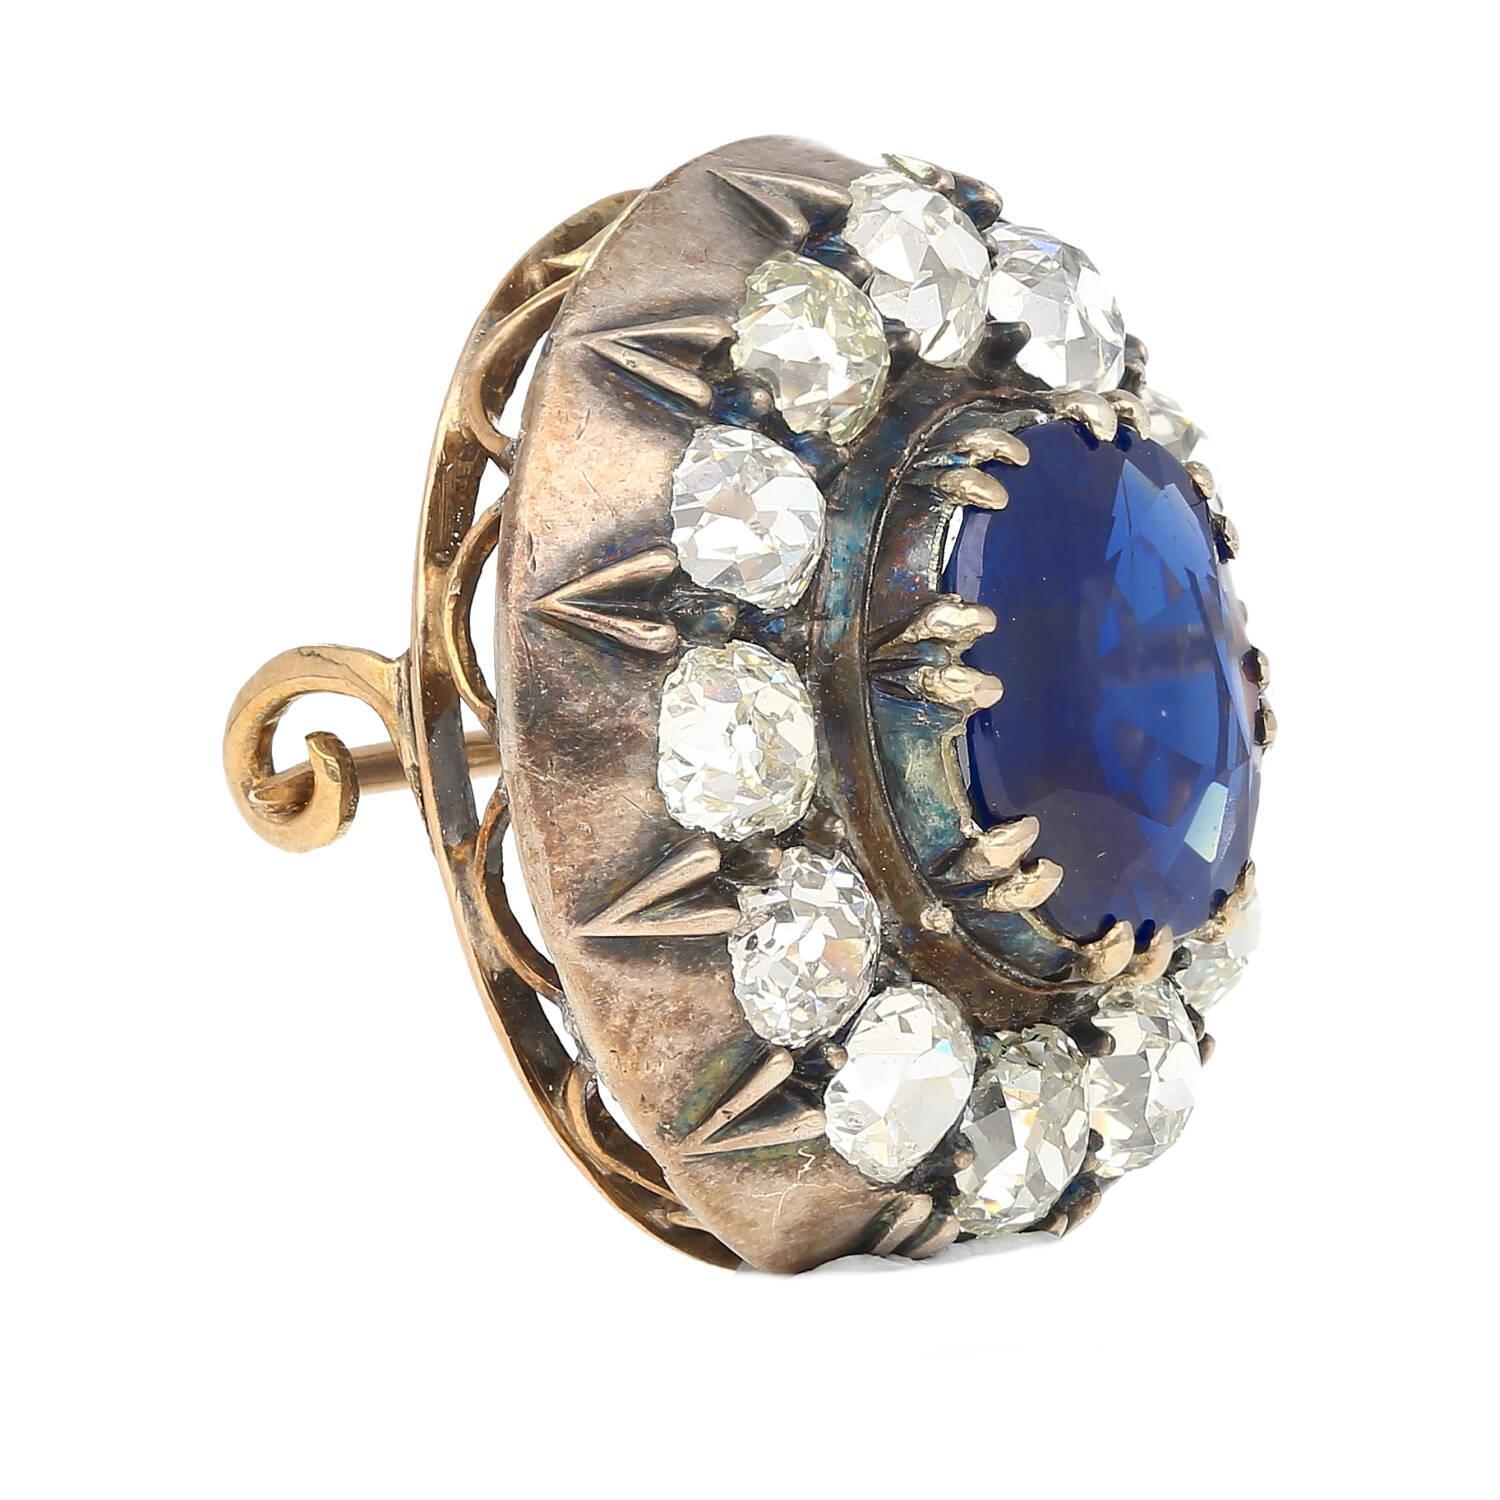 Natural No Heat 3.82 Carat Sapphire Brooch in Silver and 9K Gold In Excellent Condition For Sale In Miami, FL